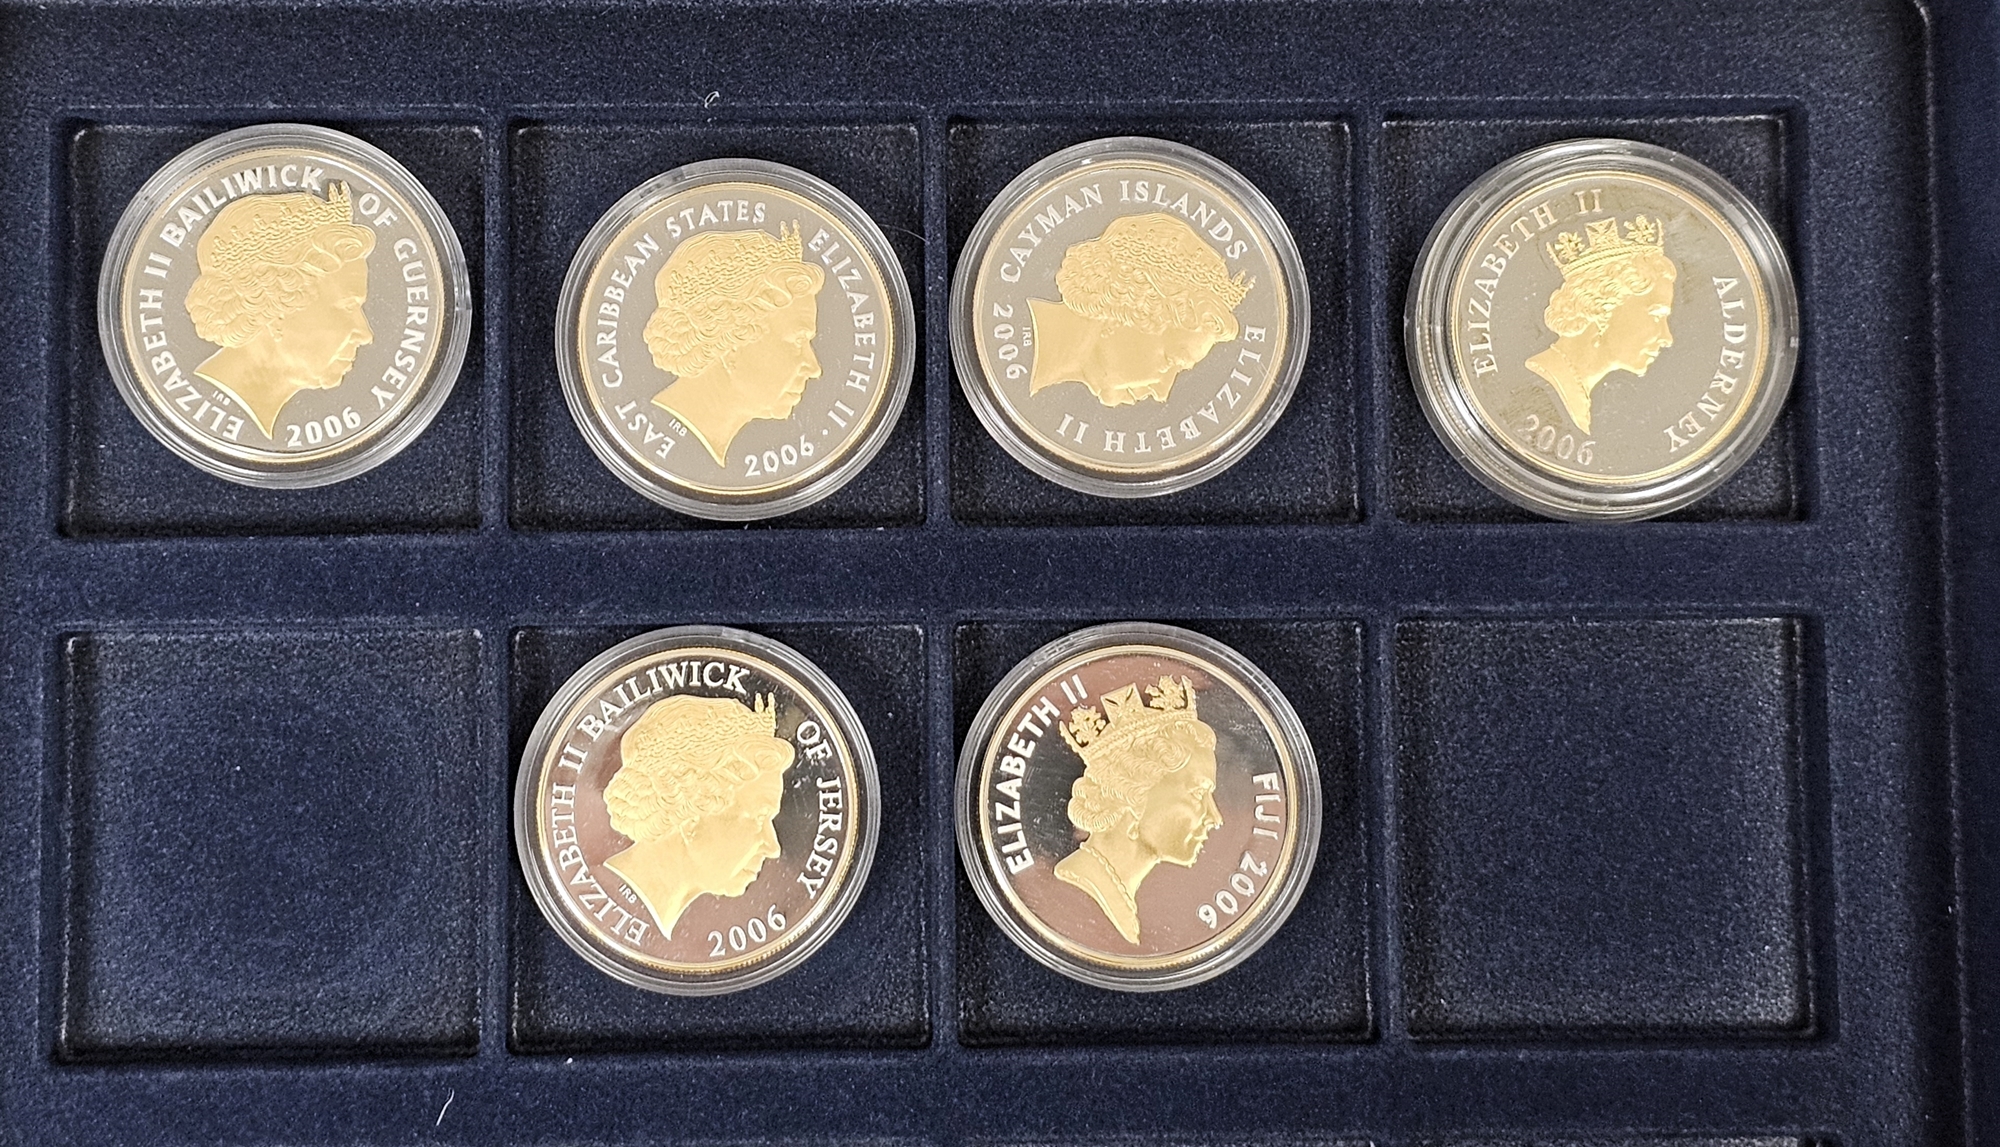 Westminster coin collection of the Queens 80th birthday, 6 coins, 3 x £5 of Jersey, Guernsey and - Image 3 of 3